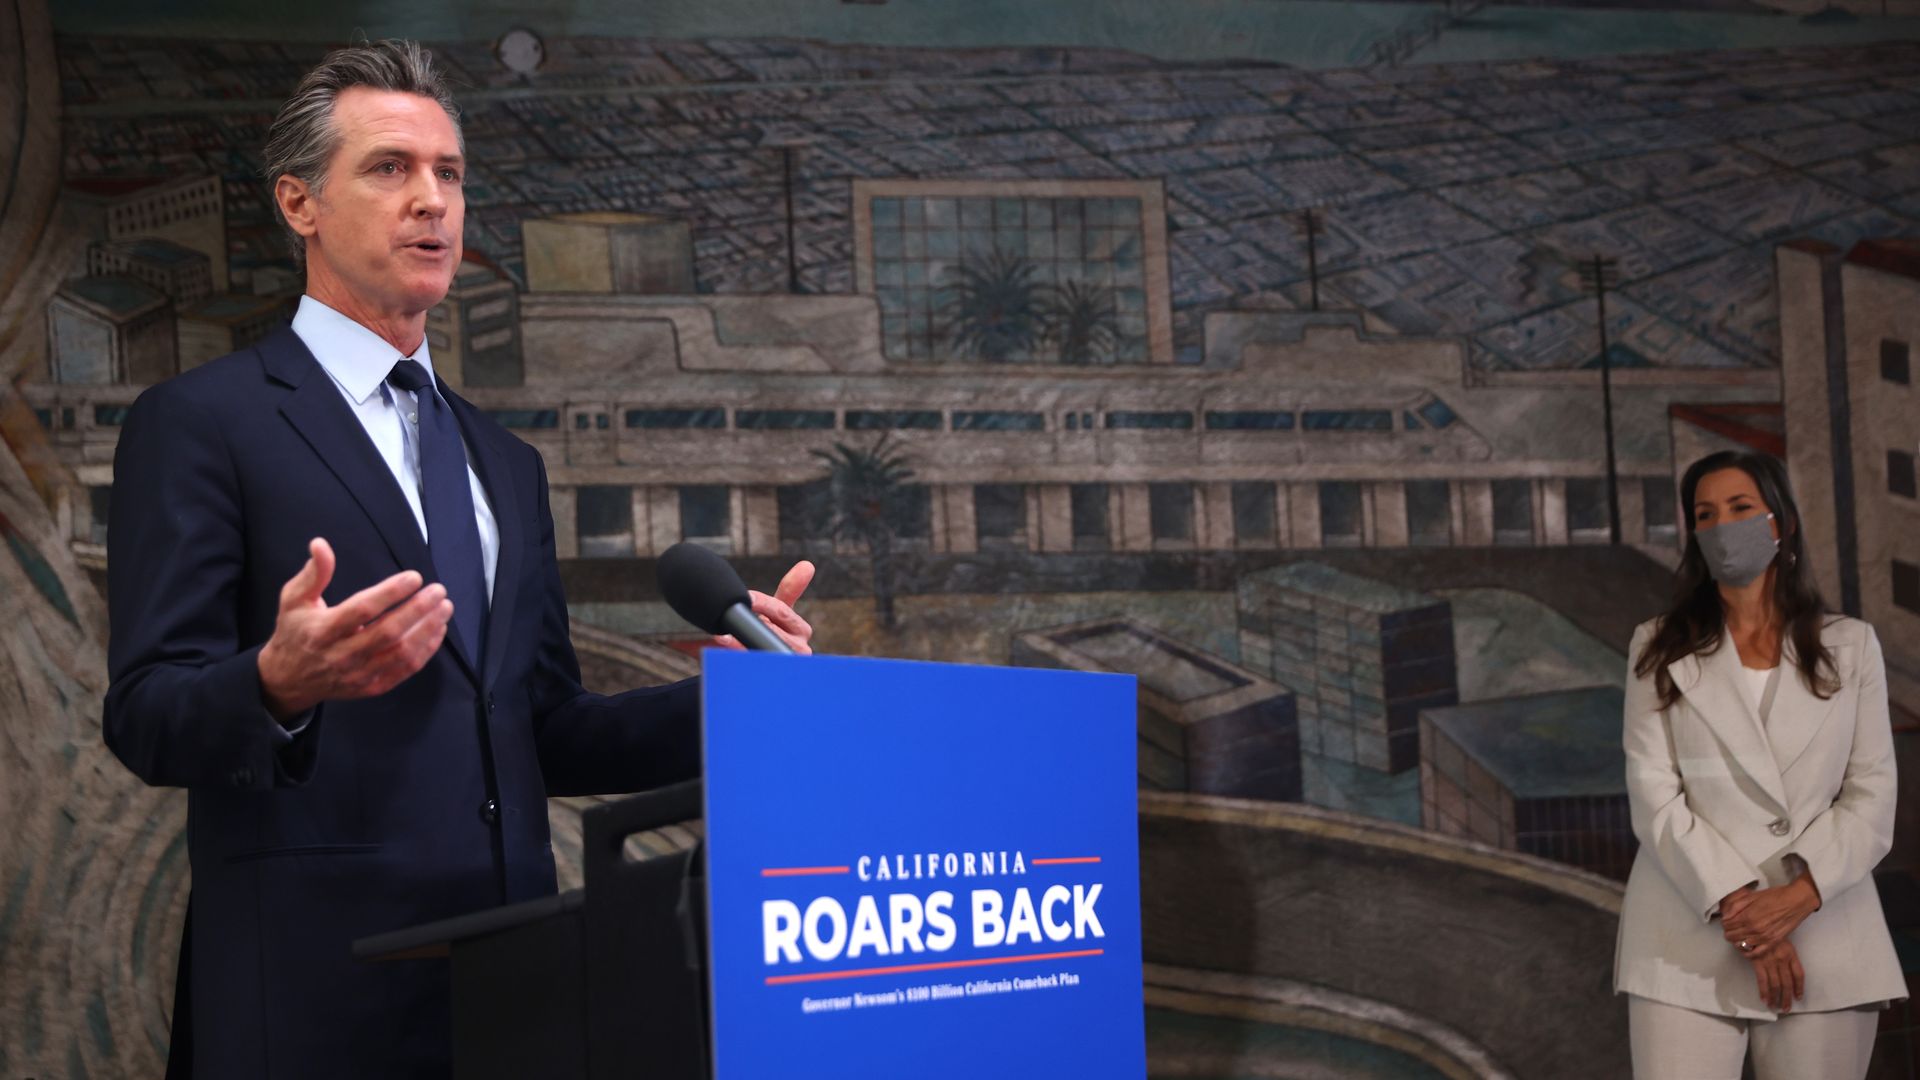 Photo of Gavin Newsom speaking while standing next to a podium that has the sign "California roars back"